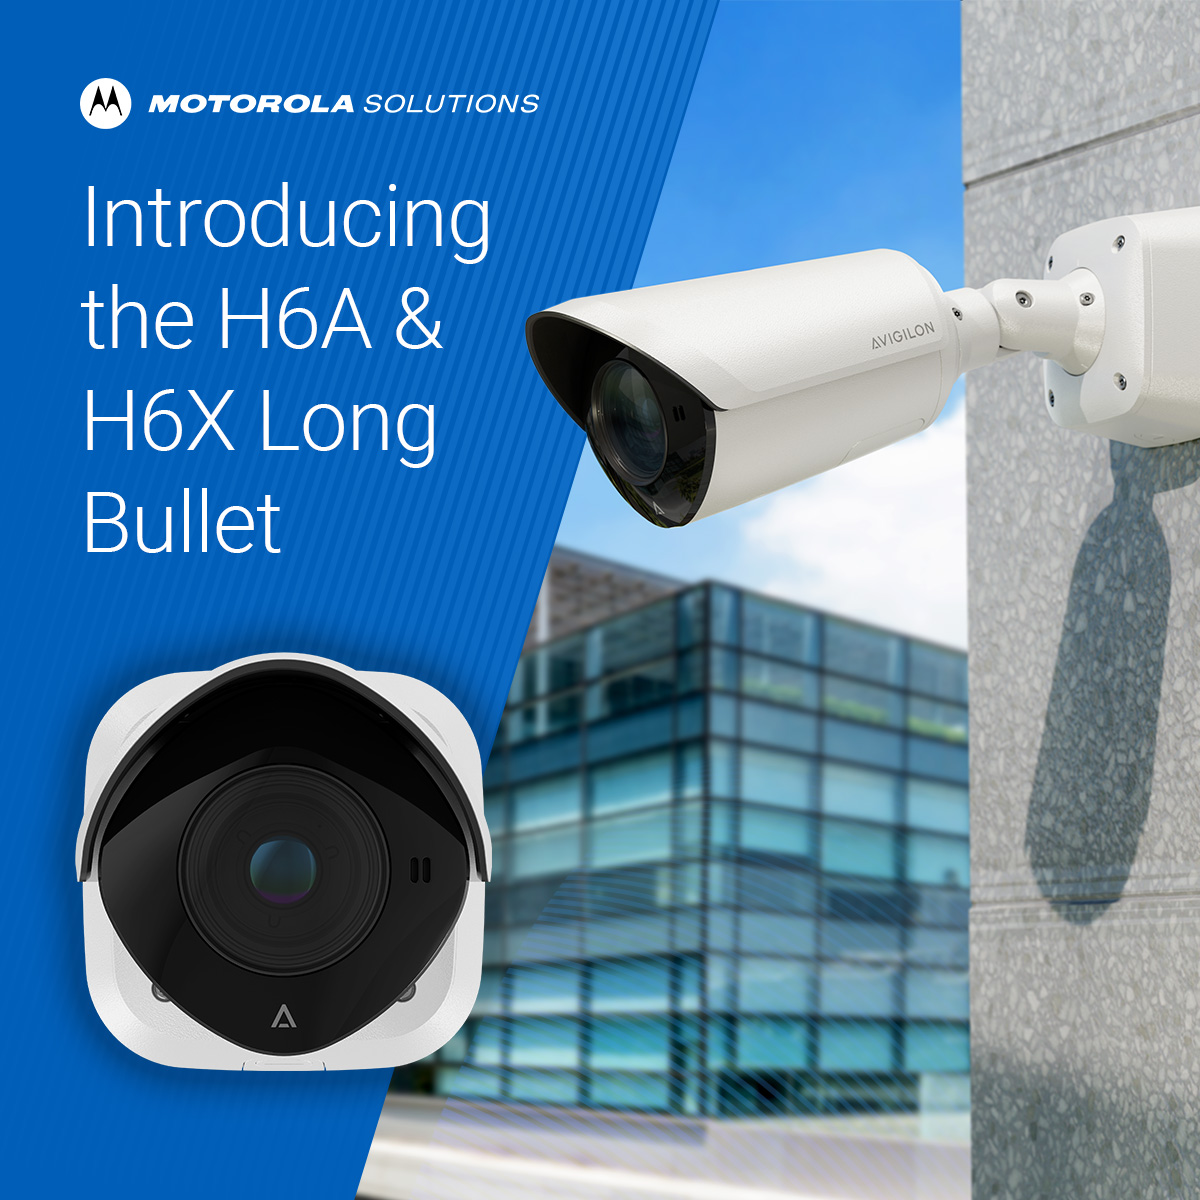 See far and wide with the new Long Bullet #security camera – available now on the #Avigilon H6A & H6X camera lines. Designed for long-range coverage, the Long Bullet camera lets you secure more ground in large areas: Get a closer look here: bit.ly/3VMqFUx